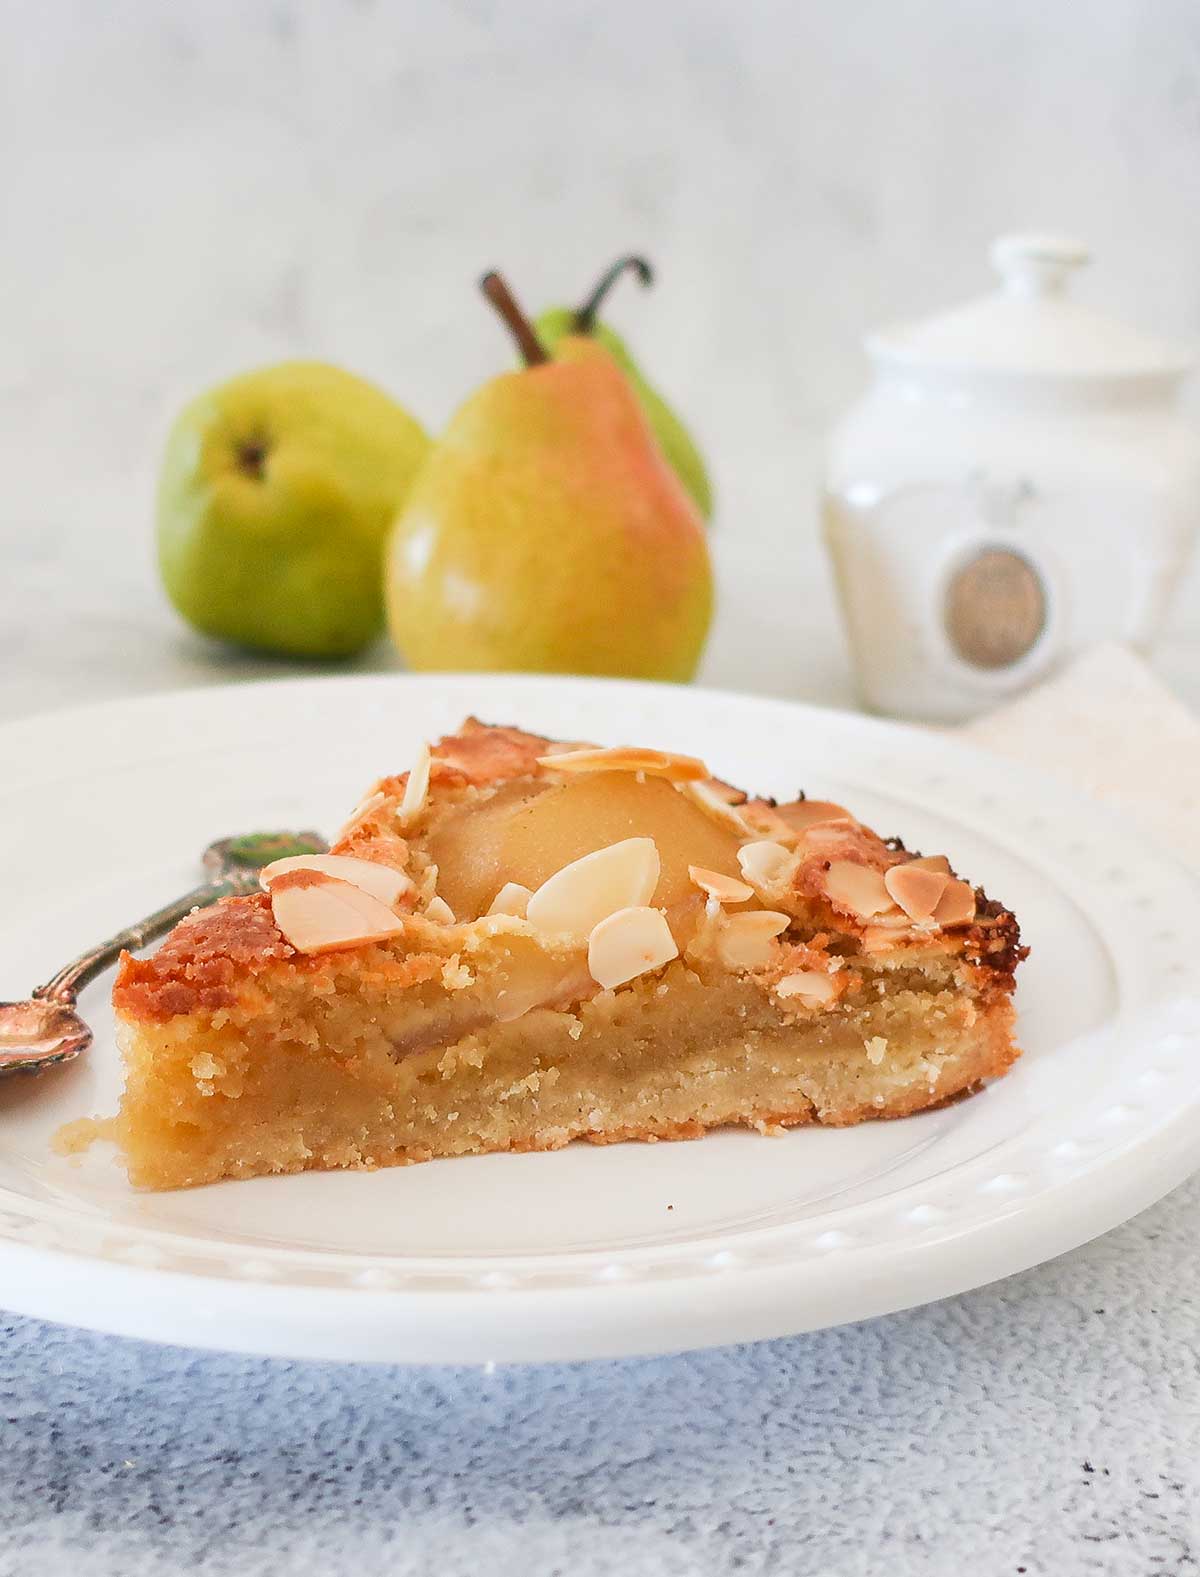 Pear Frangipane (Pear and Almond) Tart - Cooking with Team J